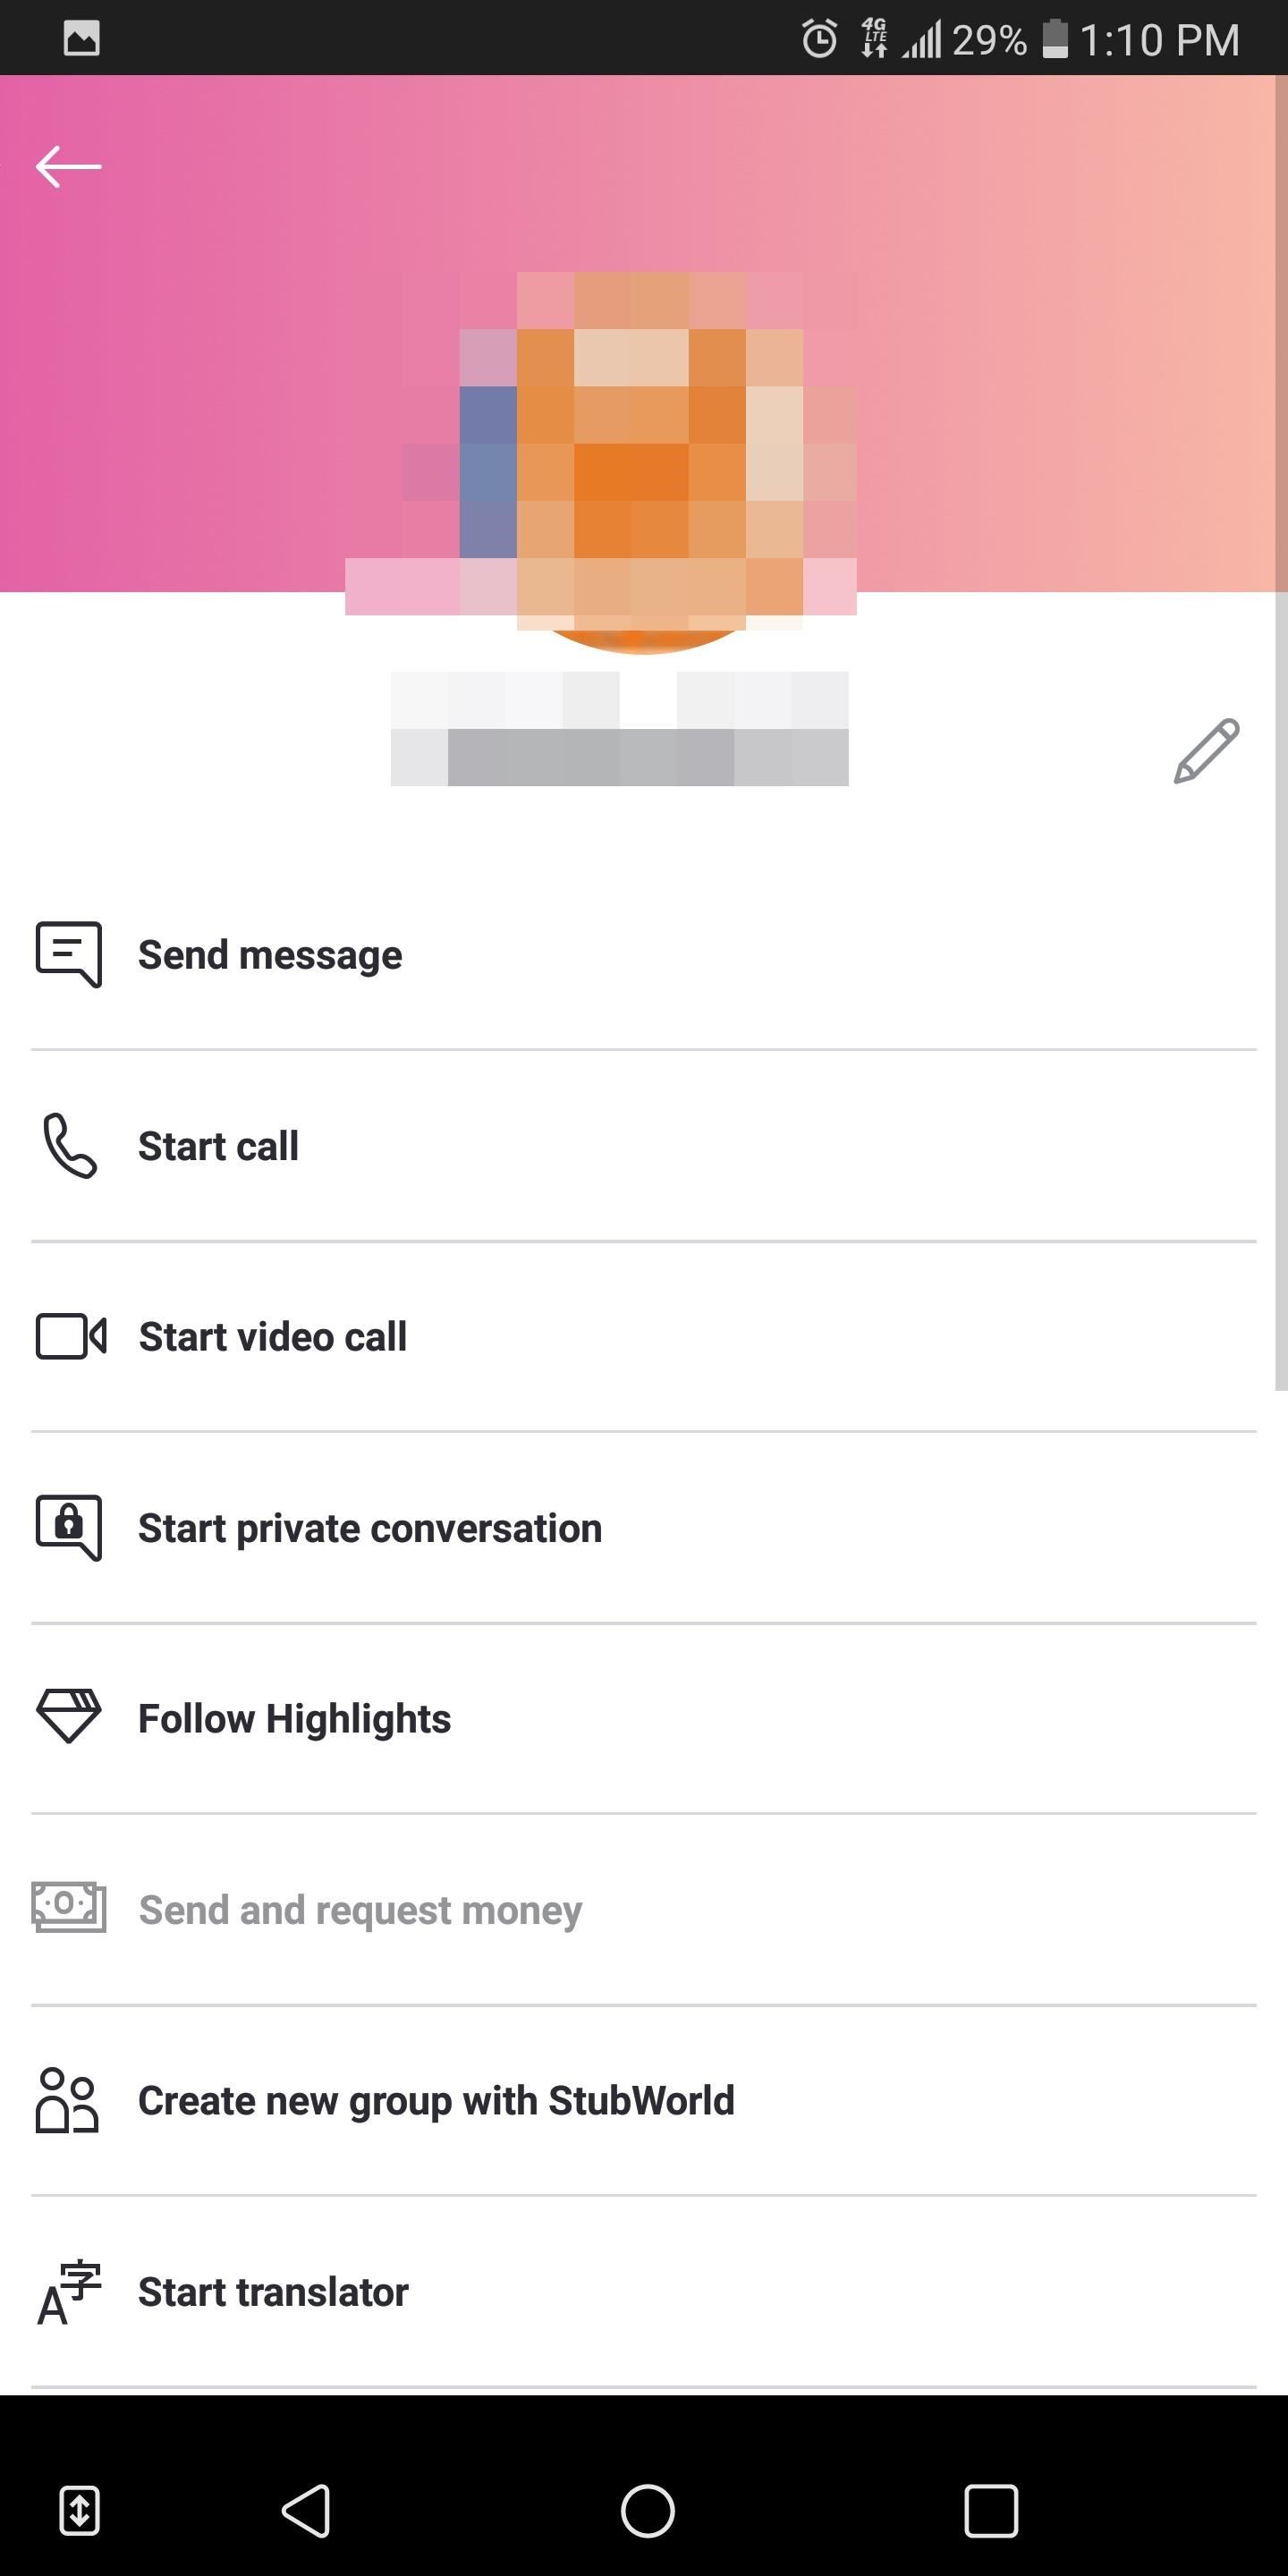 How to Enable Encryption in Skype to Securely Call & Message Your Friends